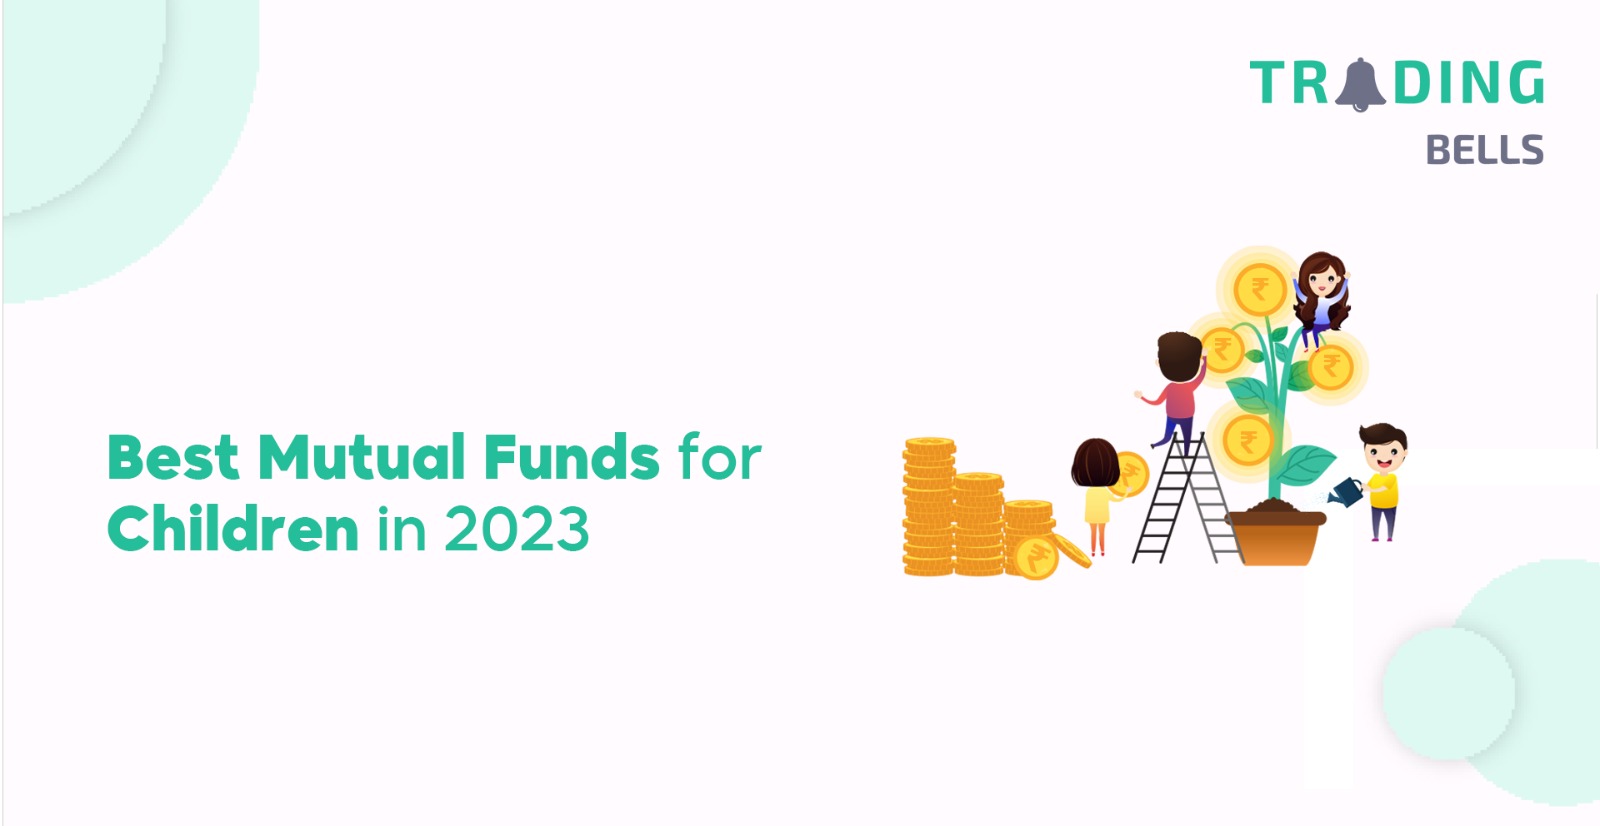 Best Mutual Funds for Children in 2023